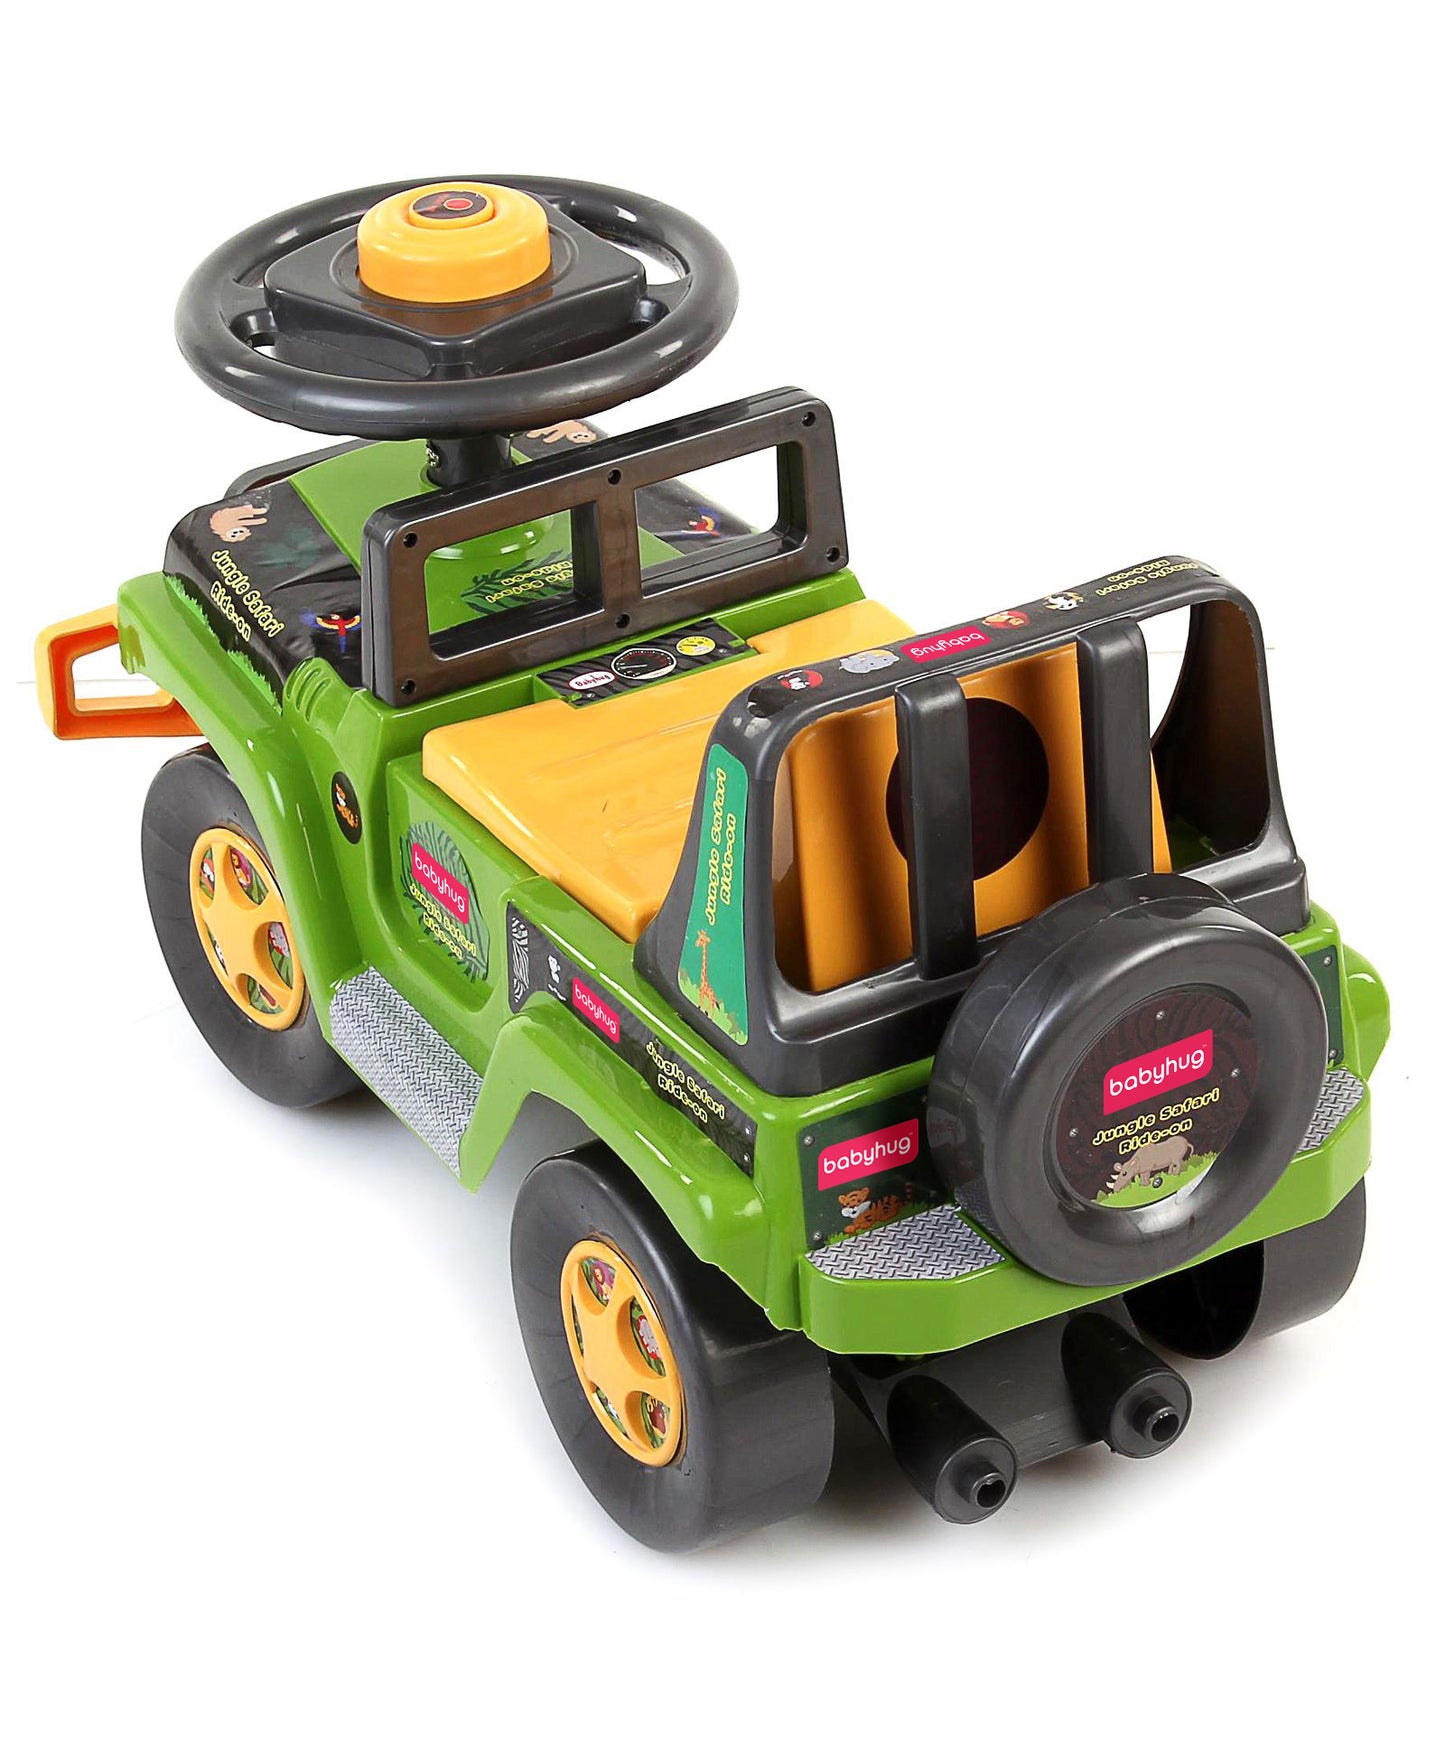 Babyhug Jungle Safari Foot To Floor Ride-On - Green & Yellow | Kids Toddler Ride-On Toy with Jungle Theme, Foot-Powered Ride-On Car for Indoor and Outdoor Fun